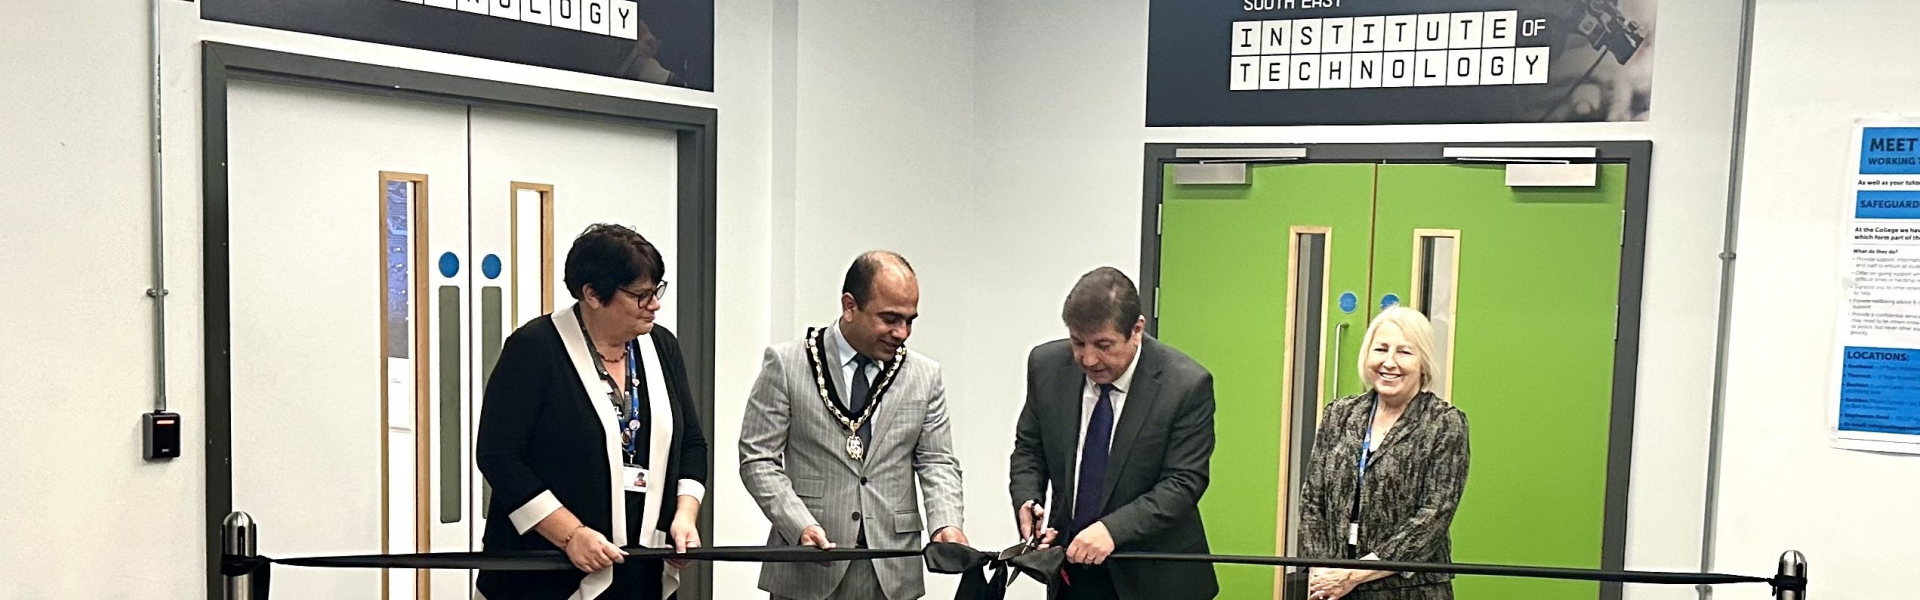 Stephen opens new South Essex College facility.